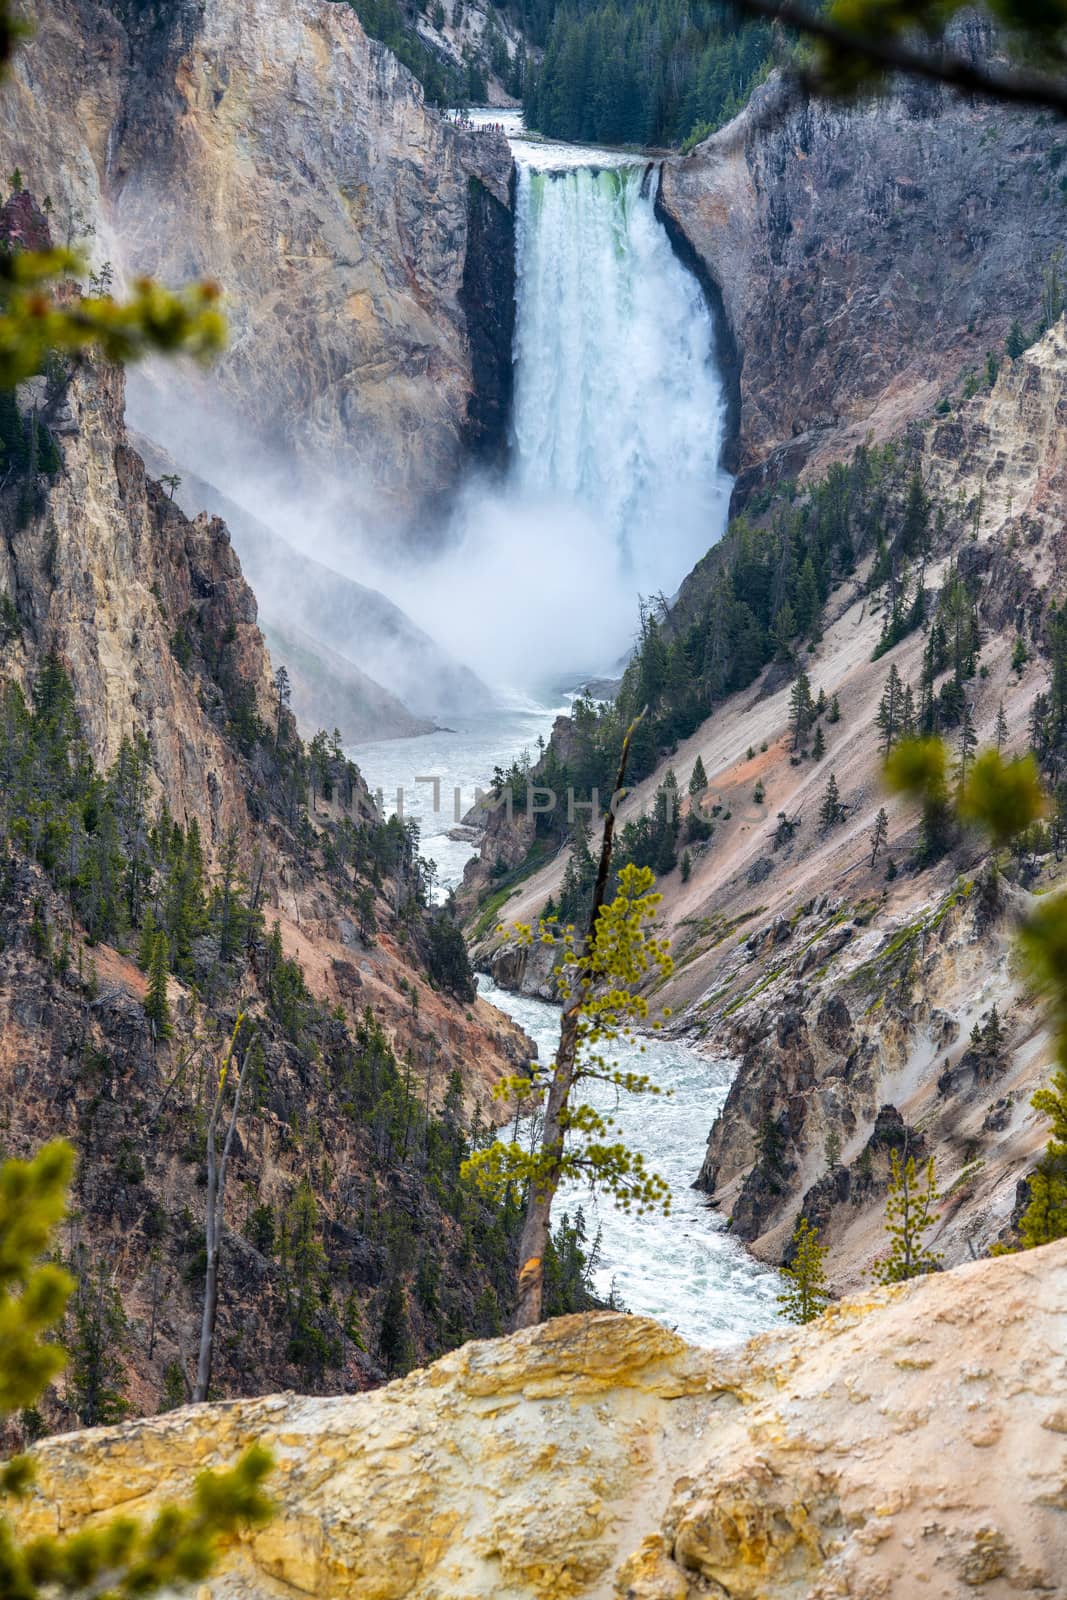 Amazing waterfalls in Yellowstone National Park, Wyoming by jovannig